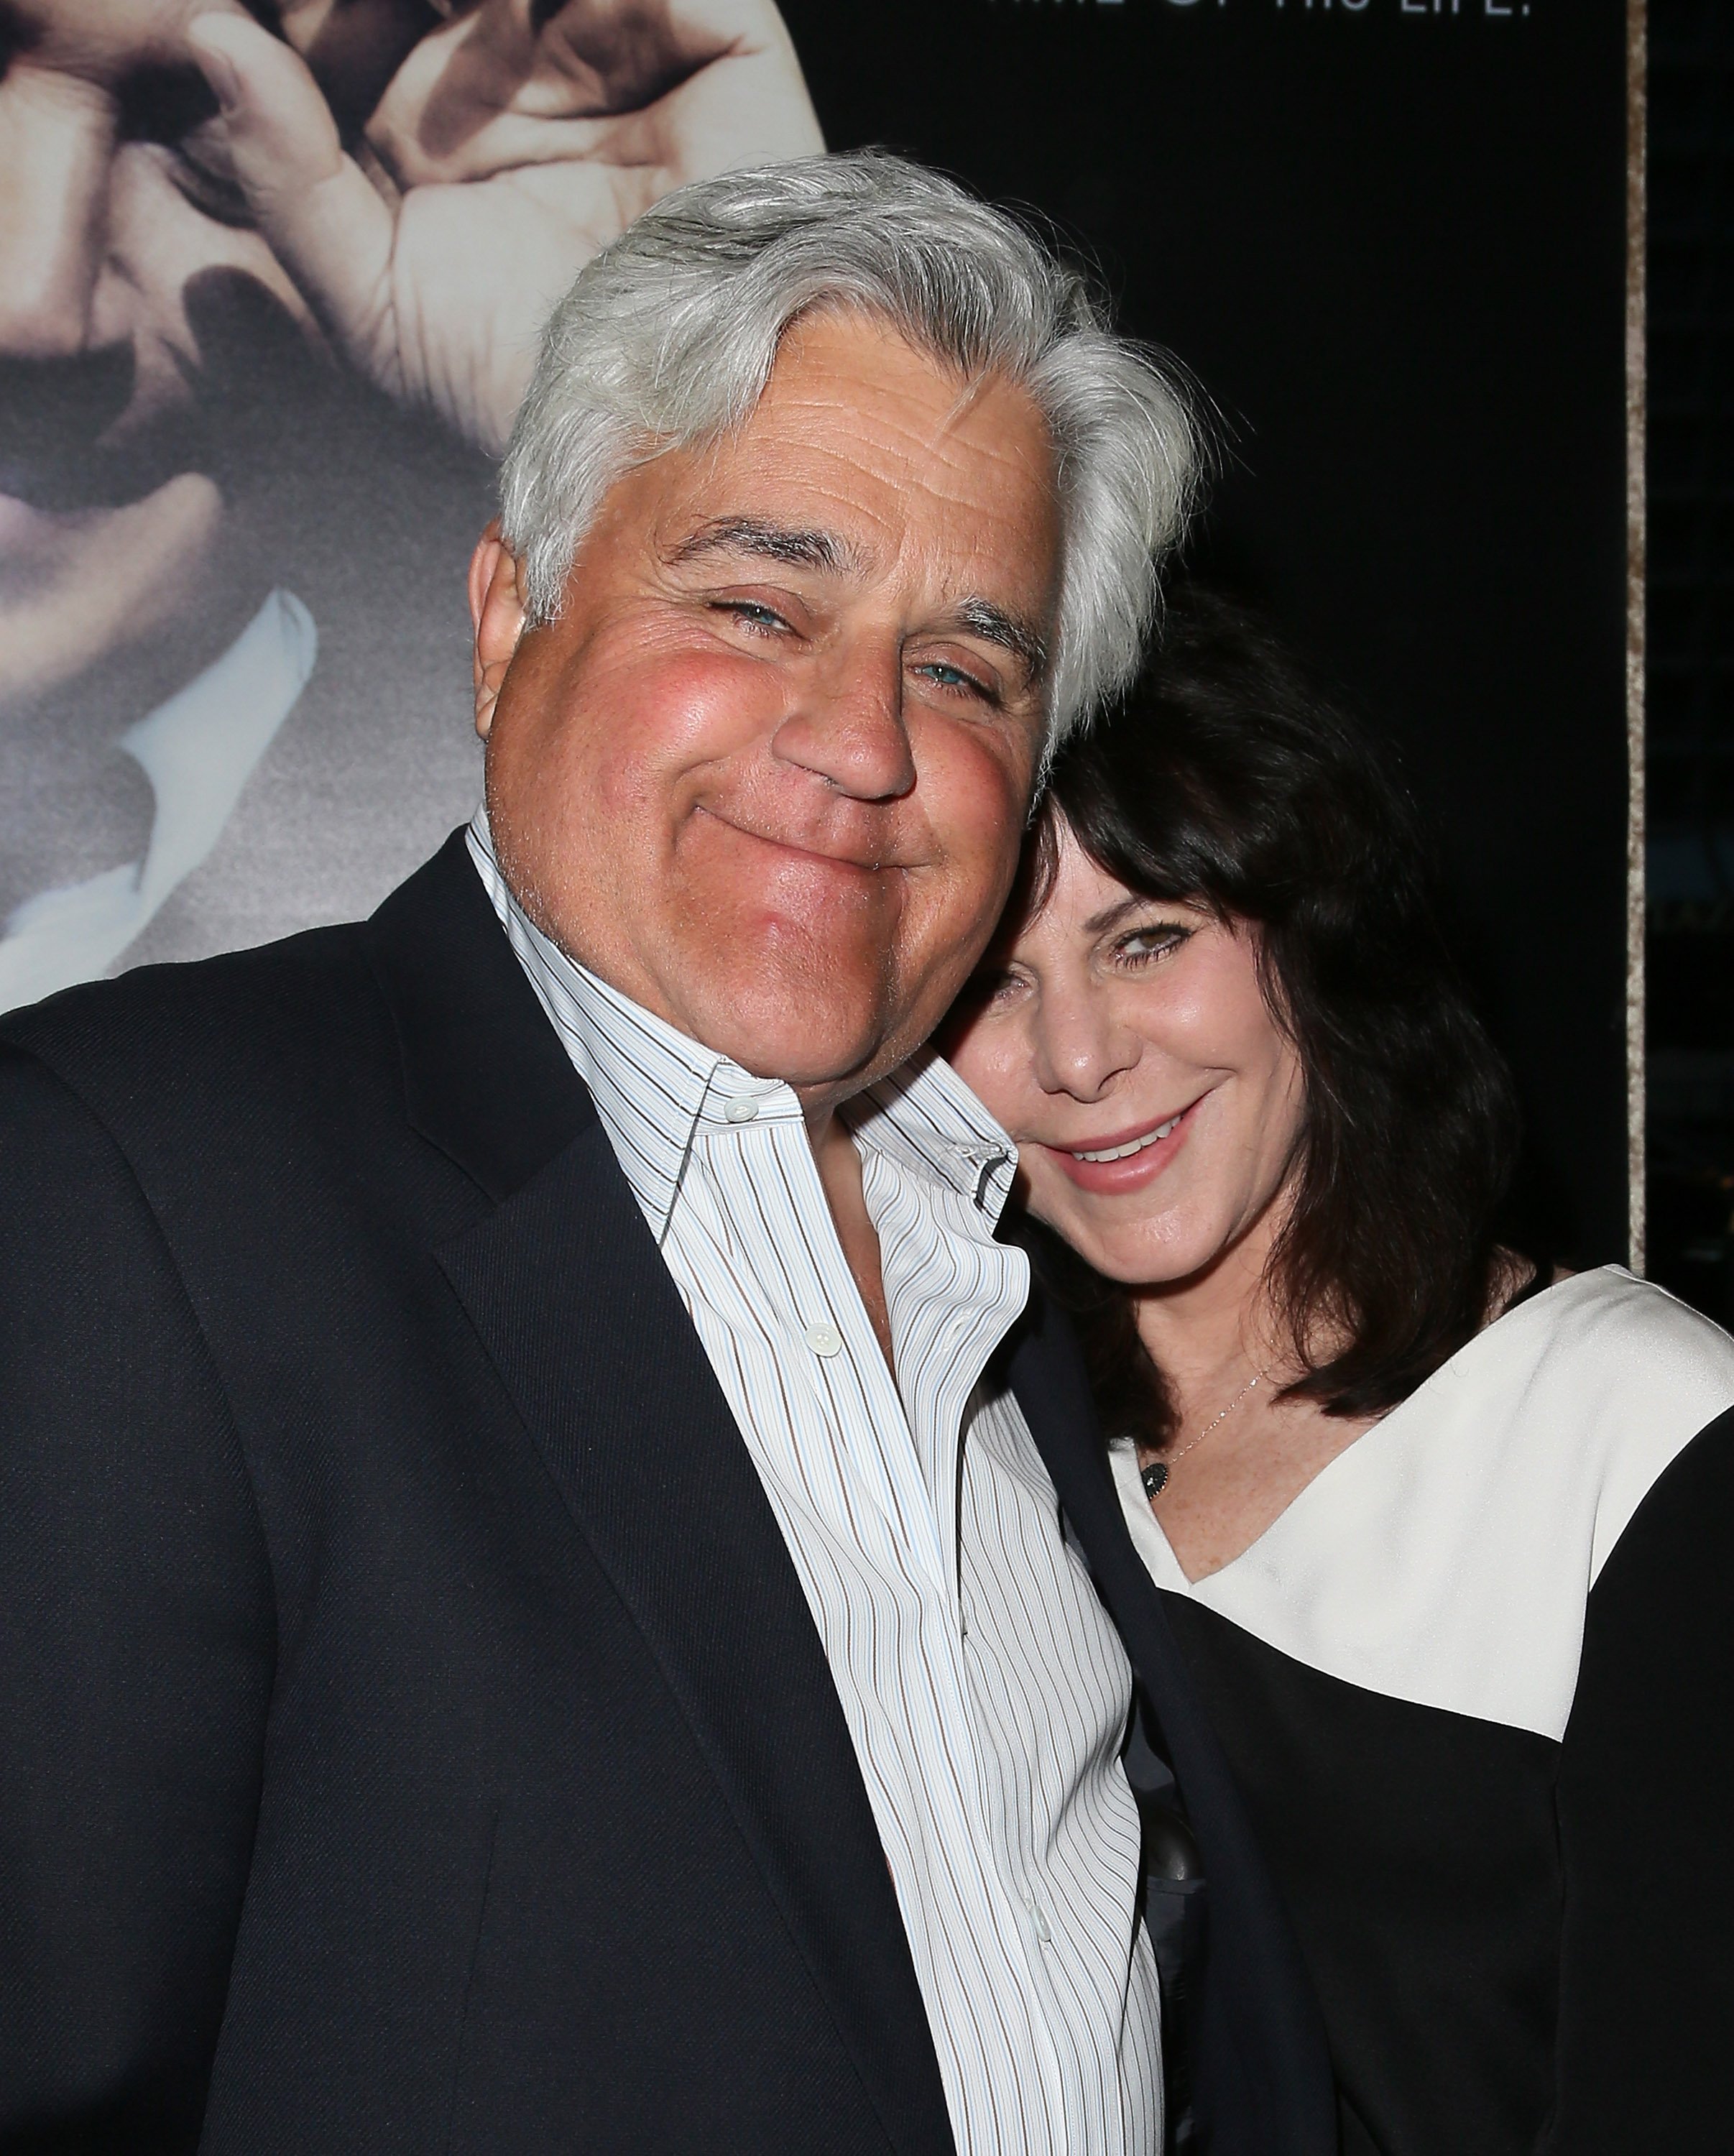 Jay Leno and Mavis Leno at the presentation of "Billy Crystal 700 Sundays" on April 17, 2014 in California | Source: Getty Images